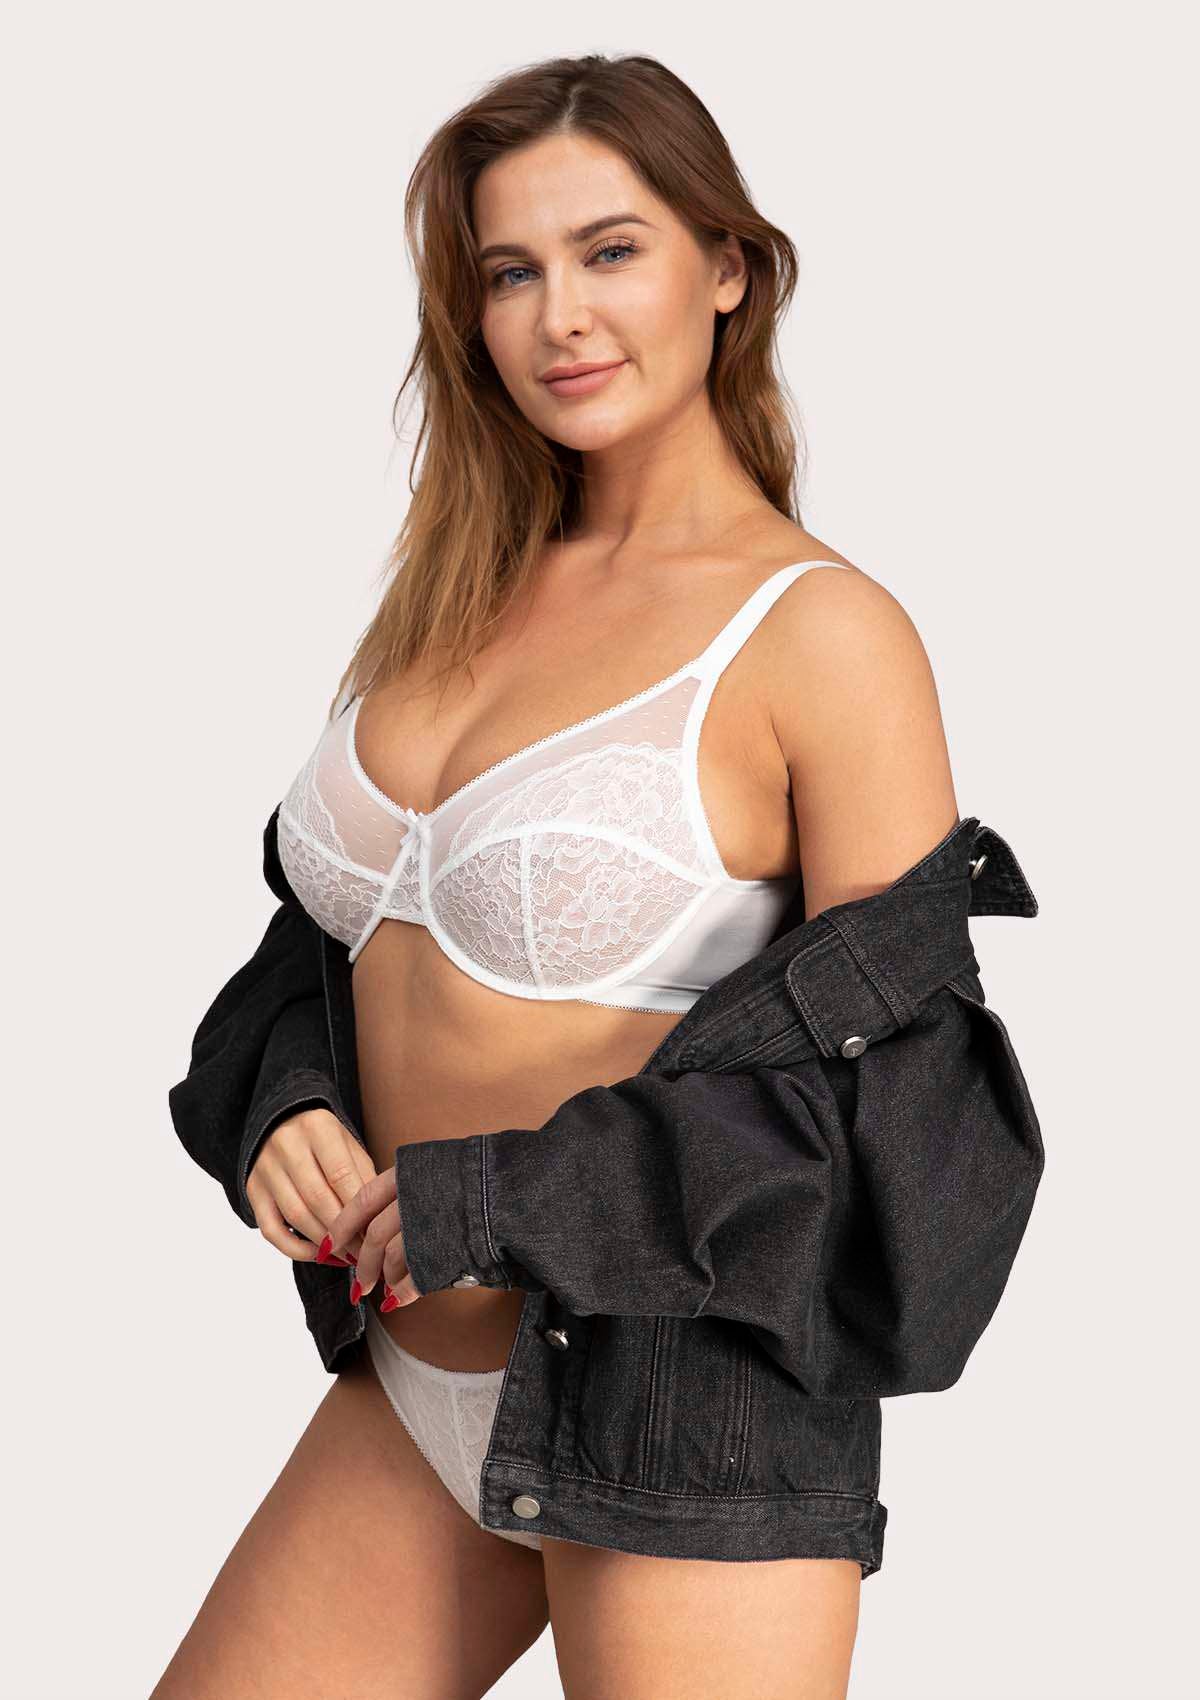 HSIA Enchante Lace Bra And Panties Set: Bra For Side And Back Fat - White / 34 / G